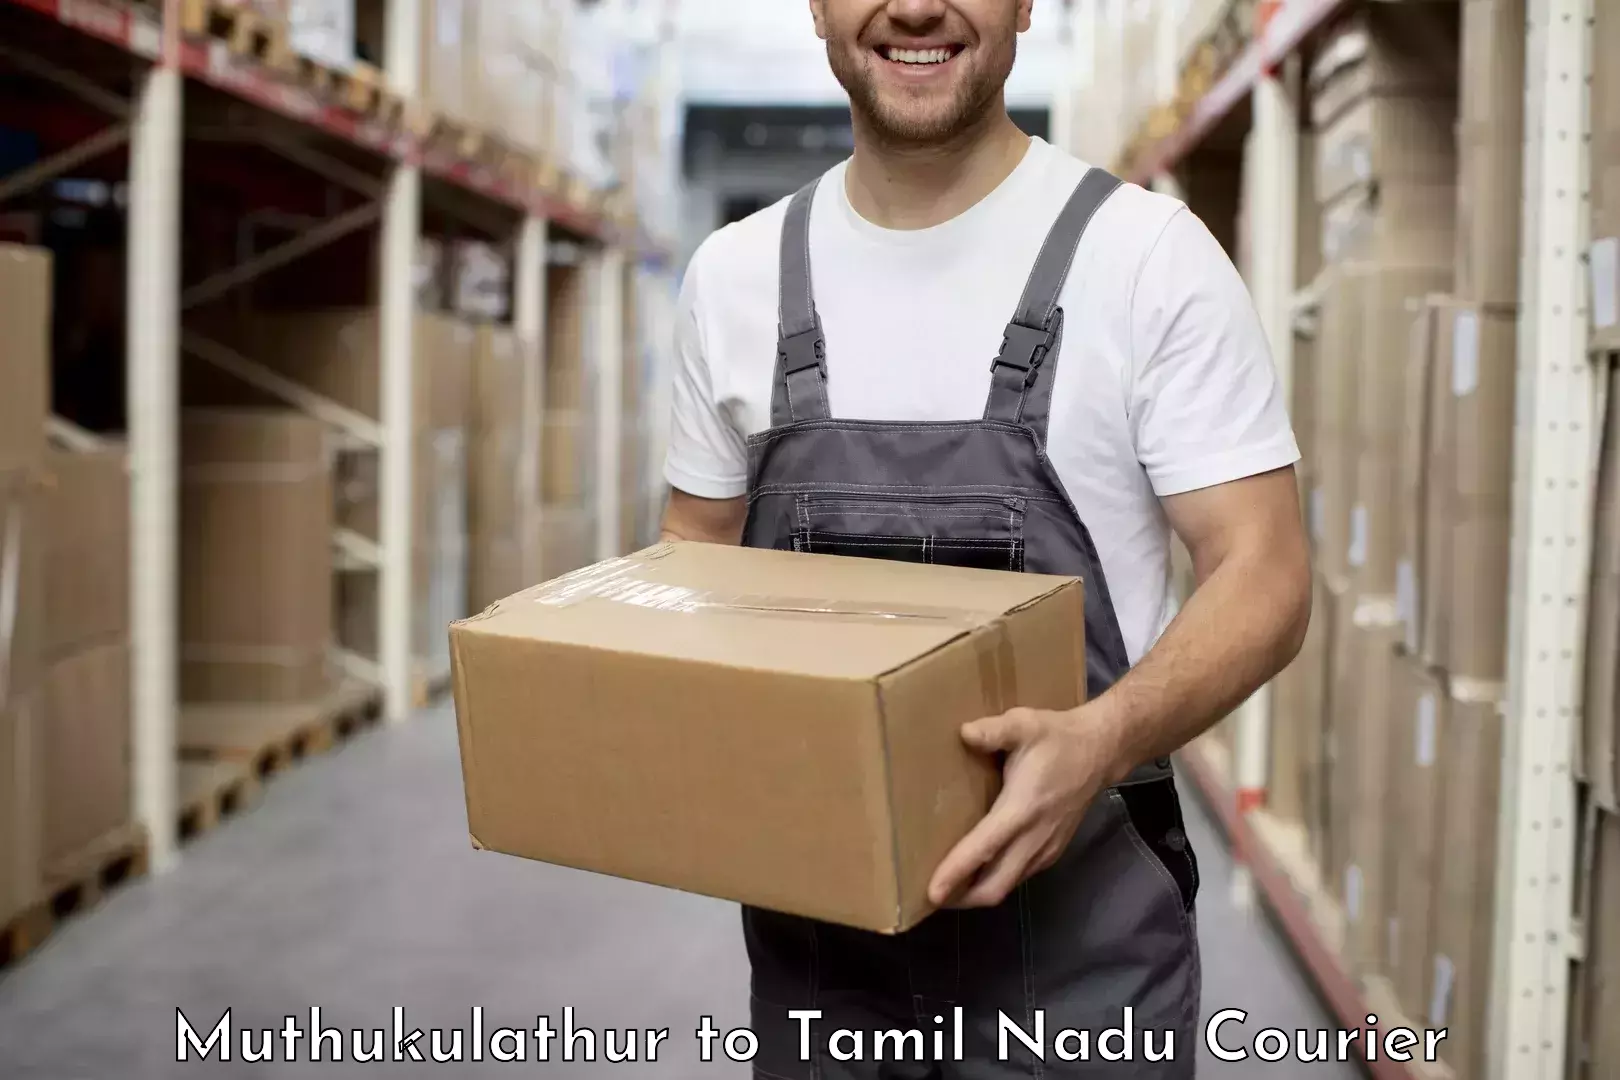 Customized delivery options Muthukulathur to Meenakshi Academy of Higher Education and Research Chennai